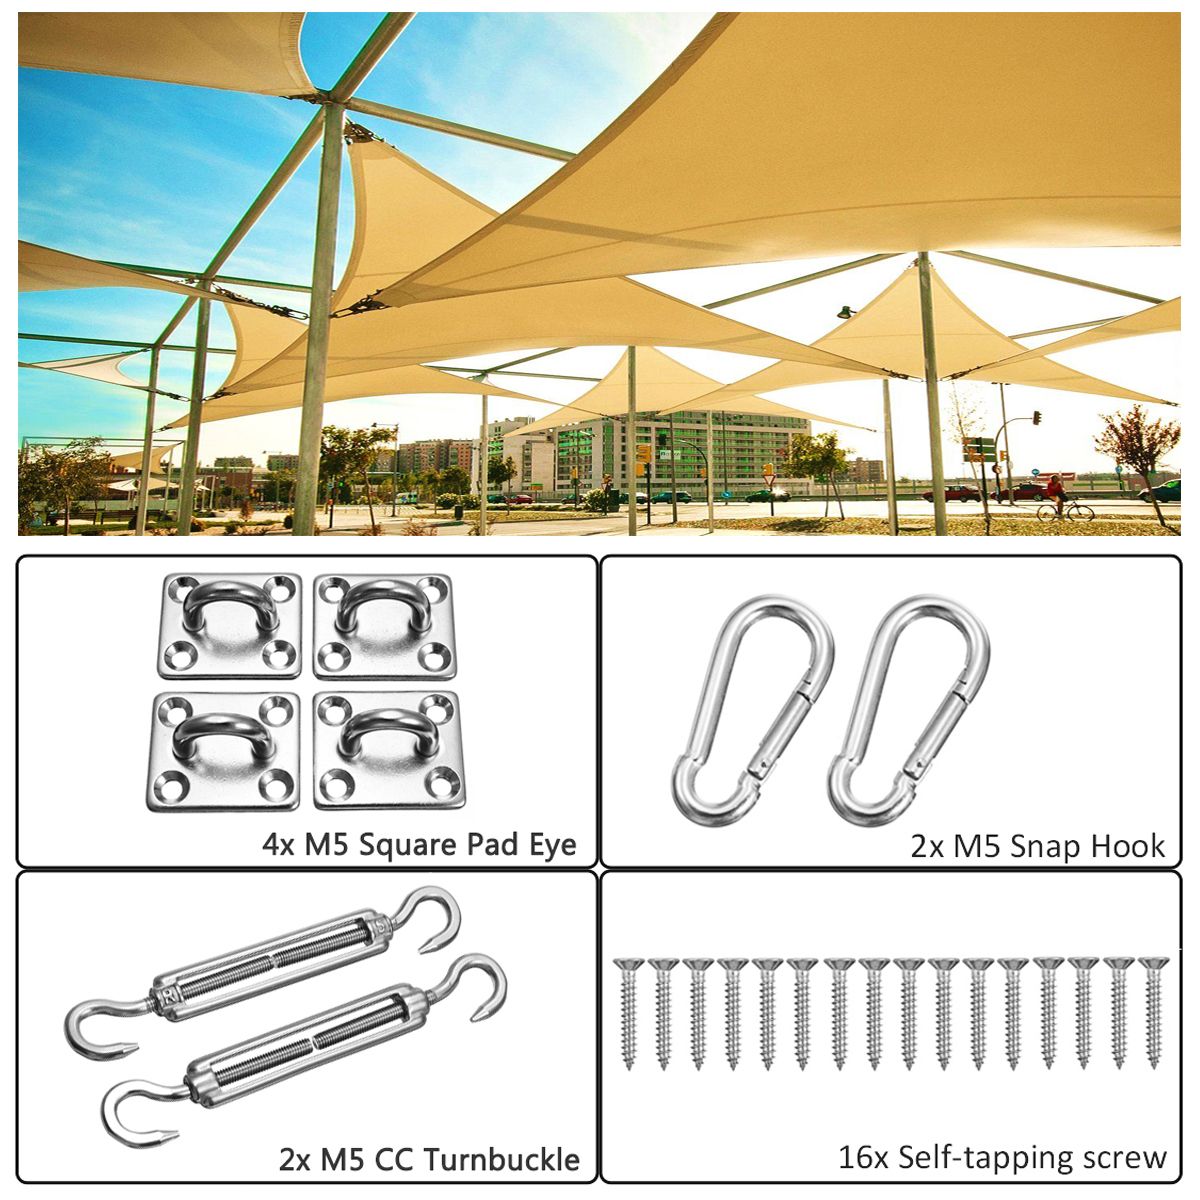 24Pcs-Sun-Shade-Sail-Accessories-for-Rectangle-or-Square-Shade-Sail-Replacement-Fitting-Tools-Kit-1392248